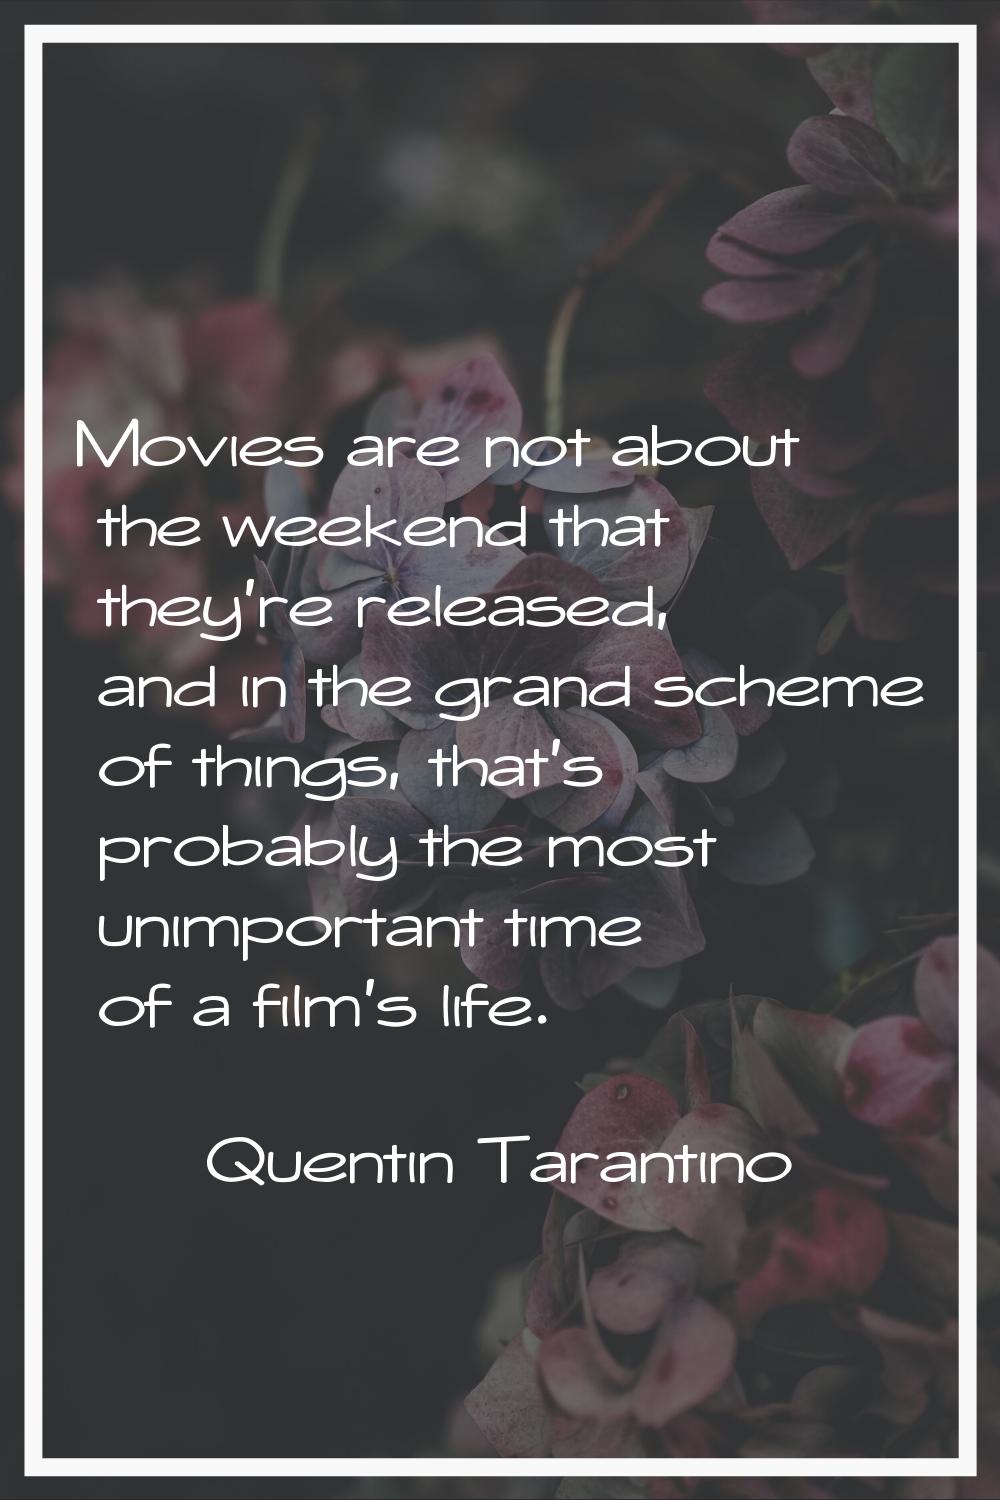 Movies are not about the weekend that they're released, and in the grand scheme of things, that's p